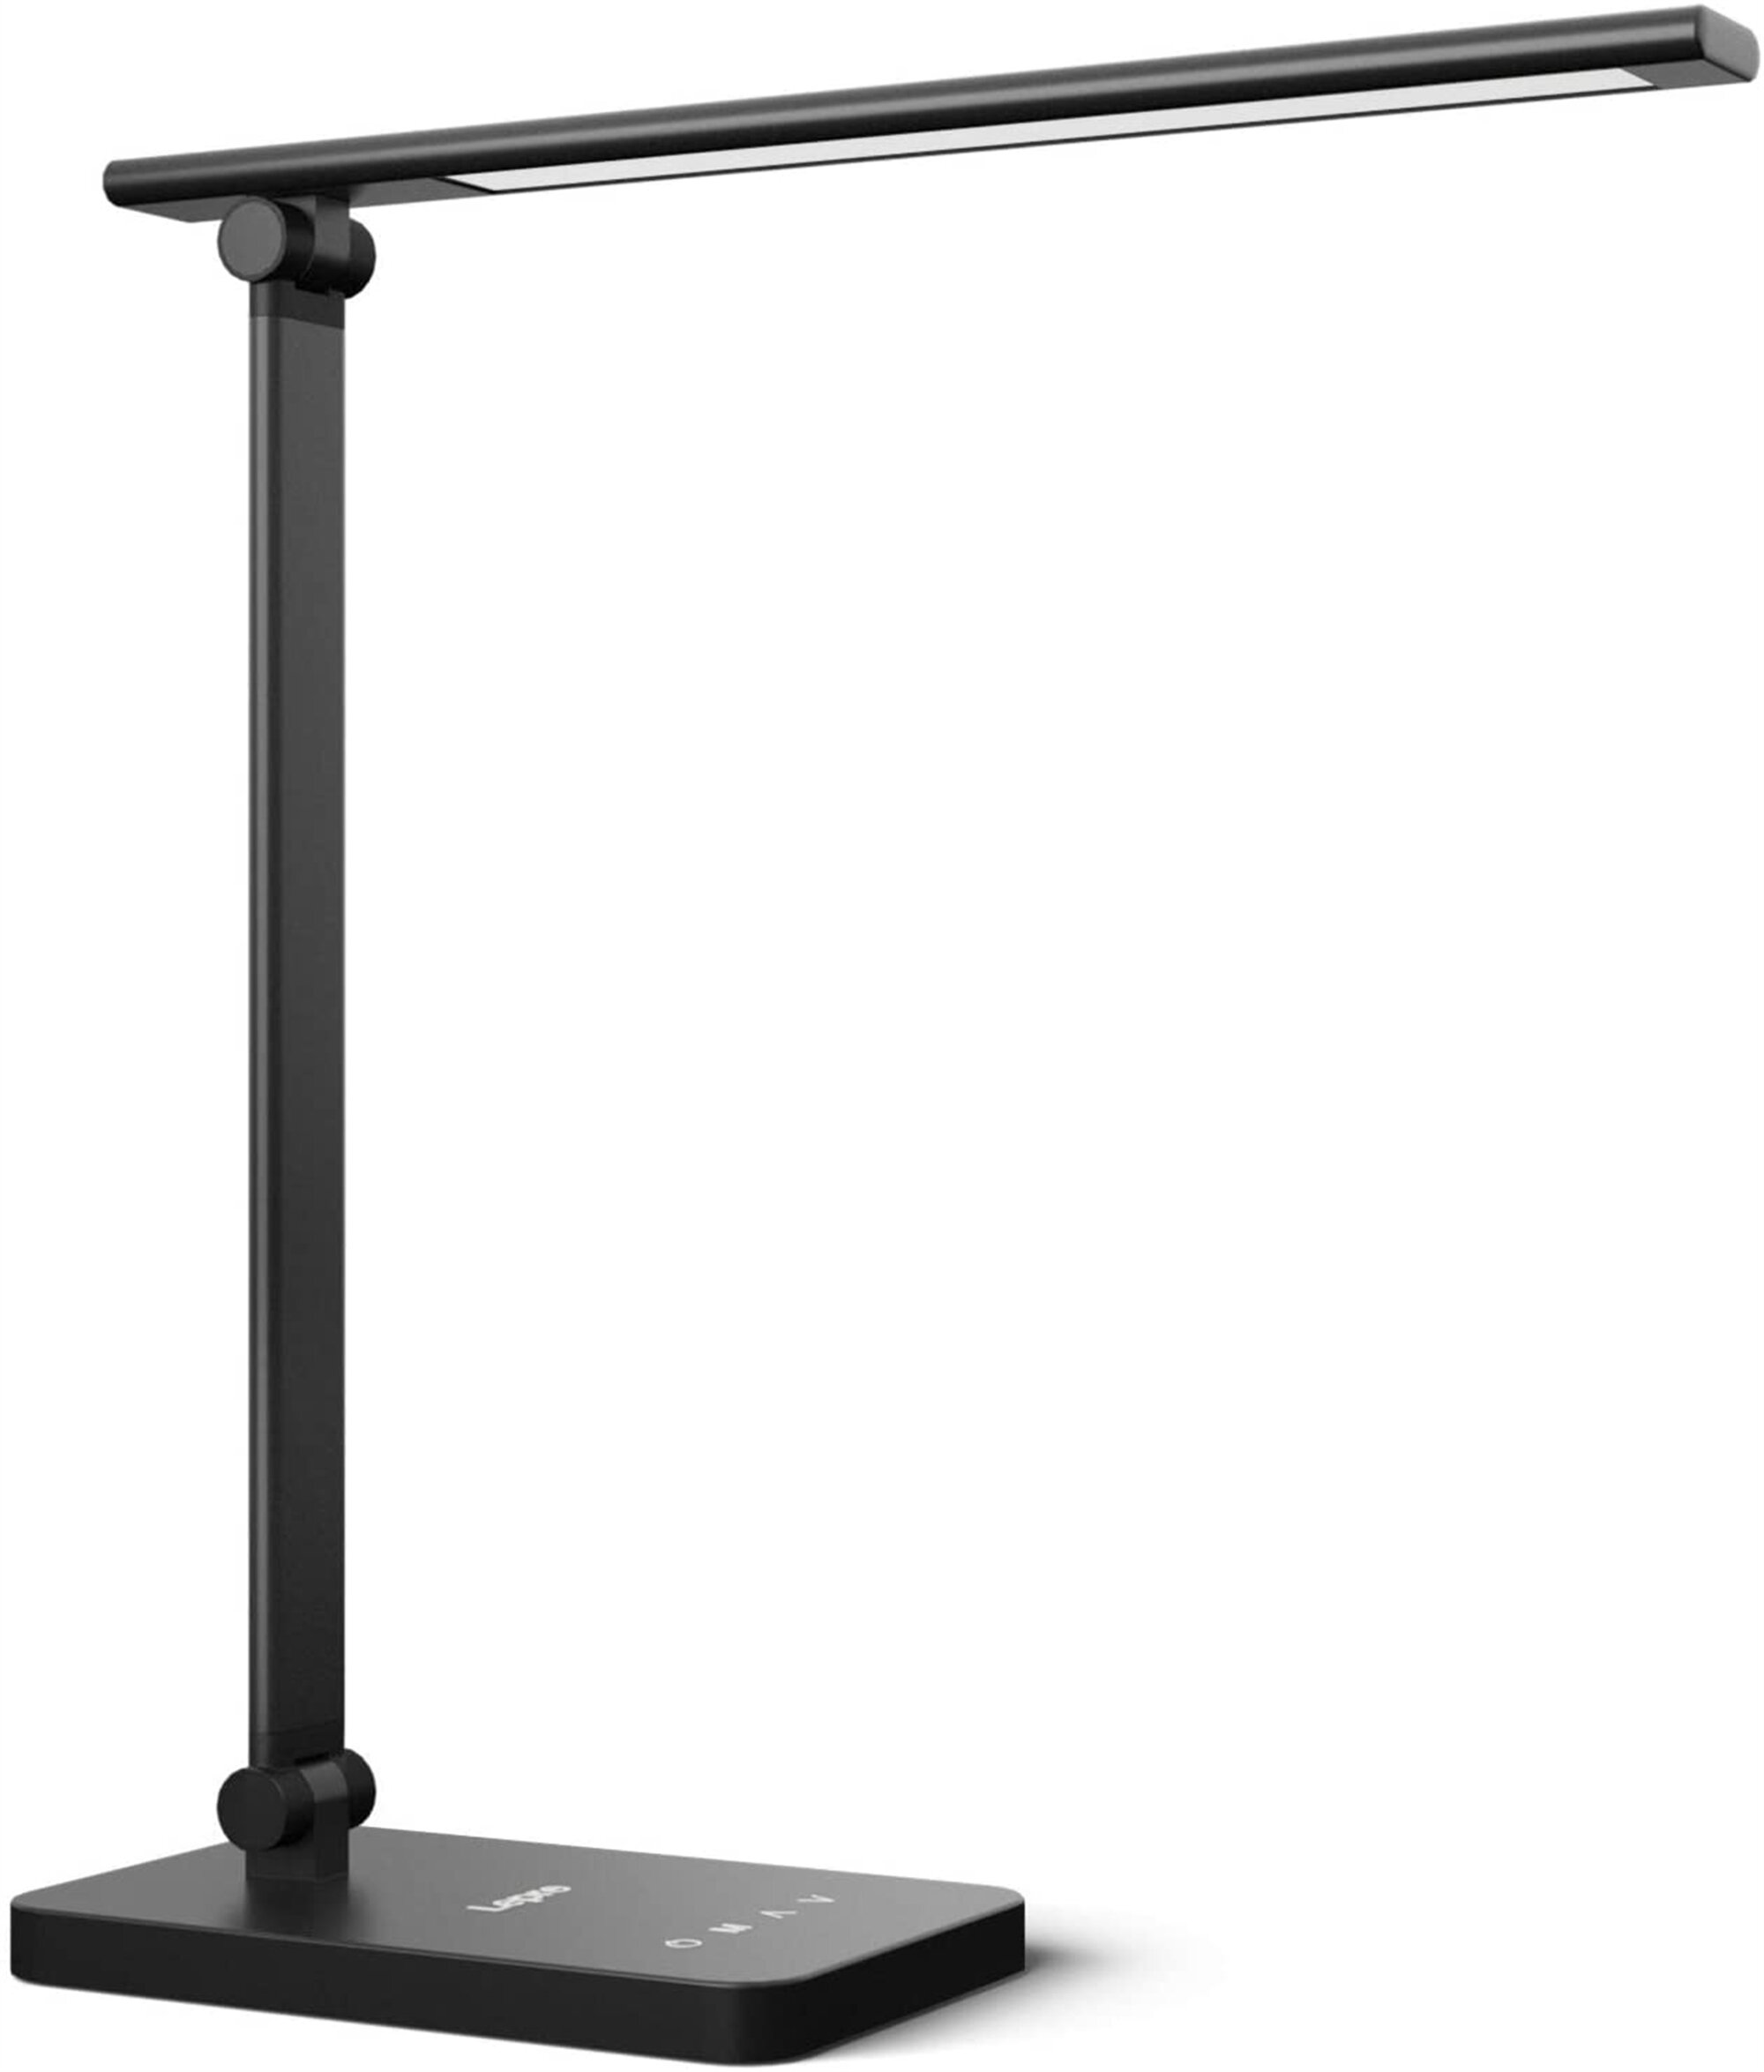 Hemara Reading Lamps Eye-protected Touch-Sensitive Dimmable LED Desk Lamp,3-Level Brightness for Different Occasions